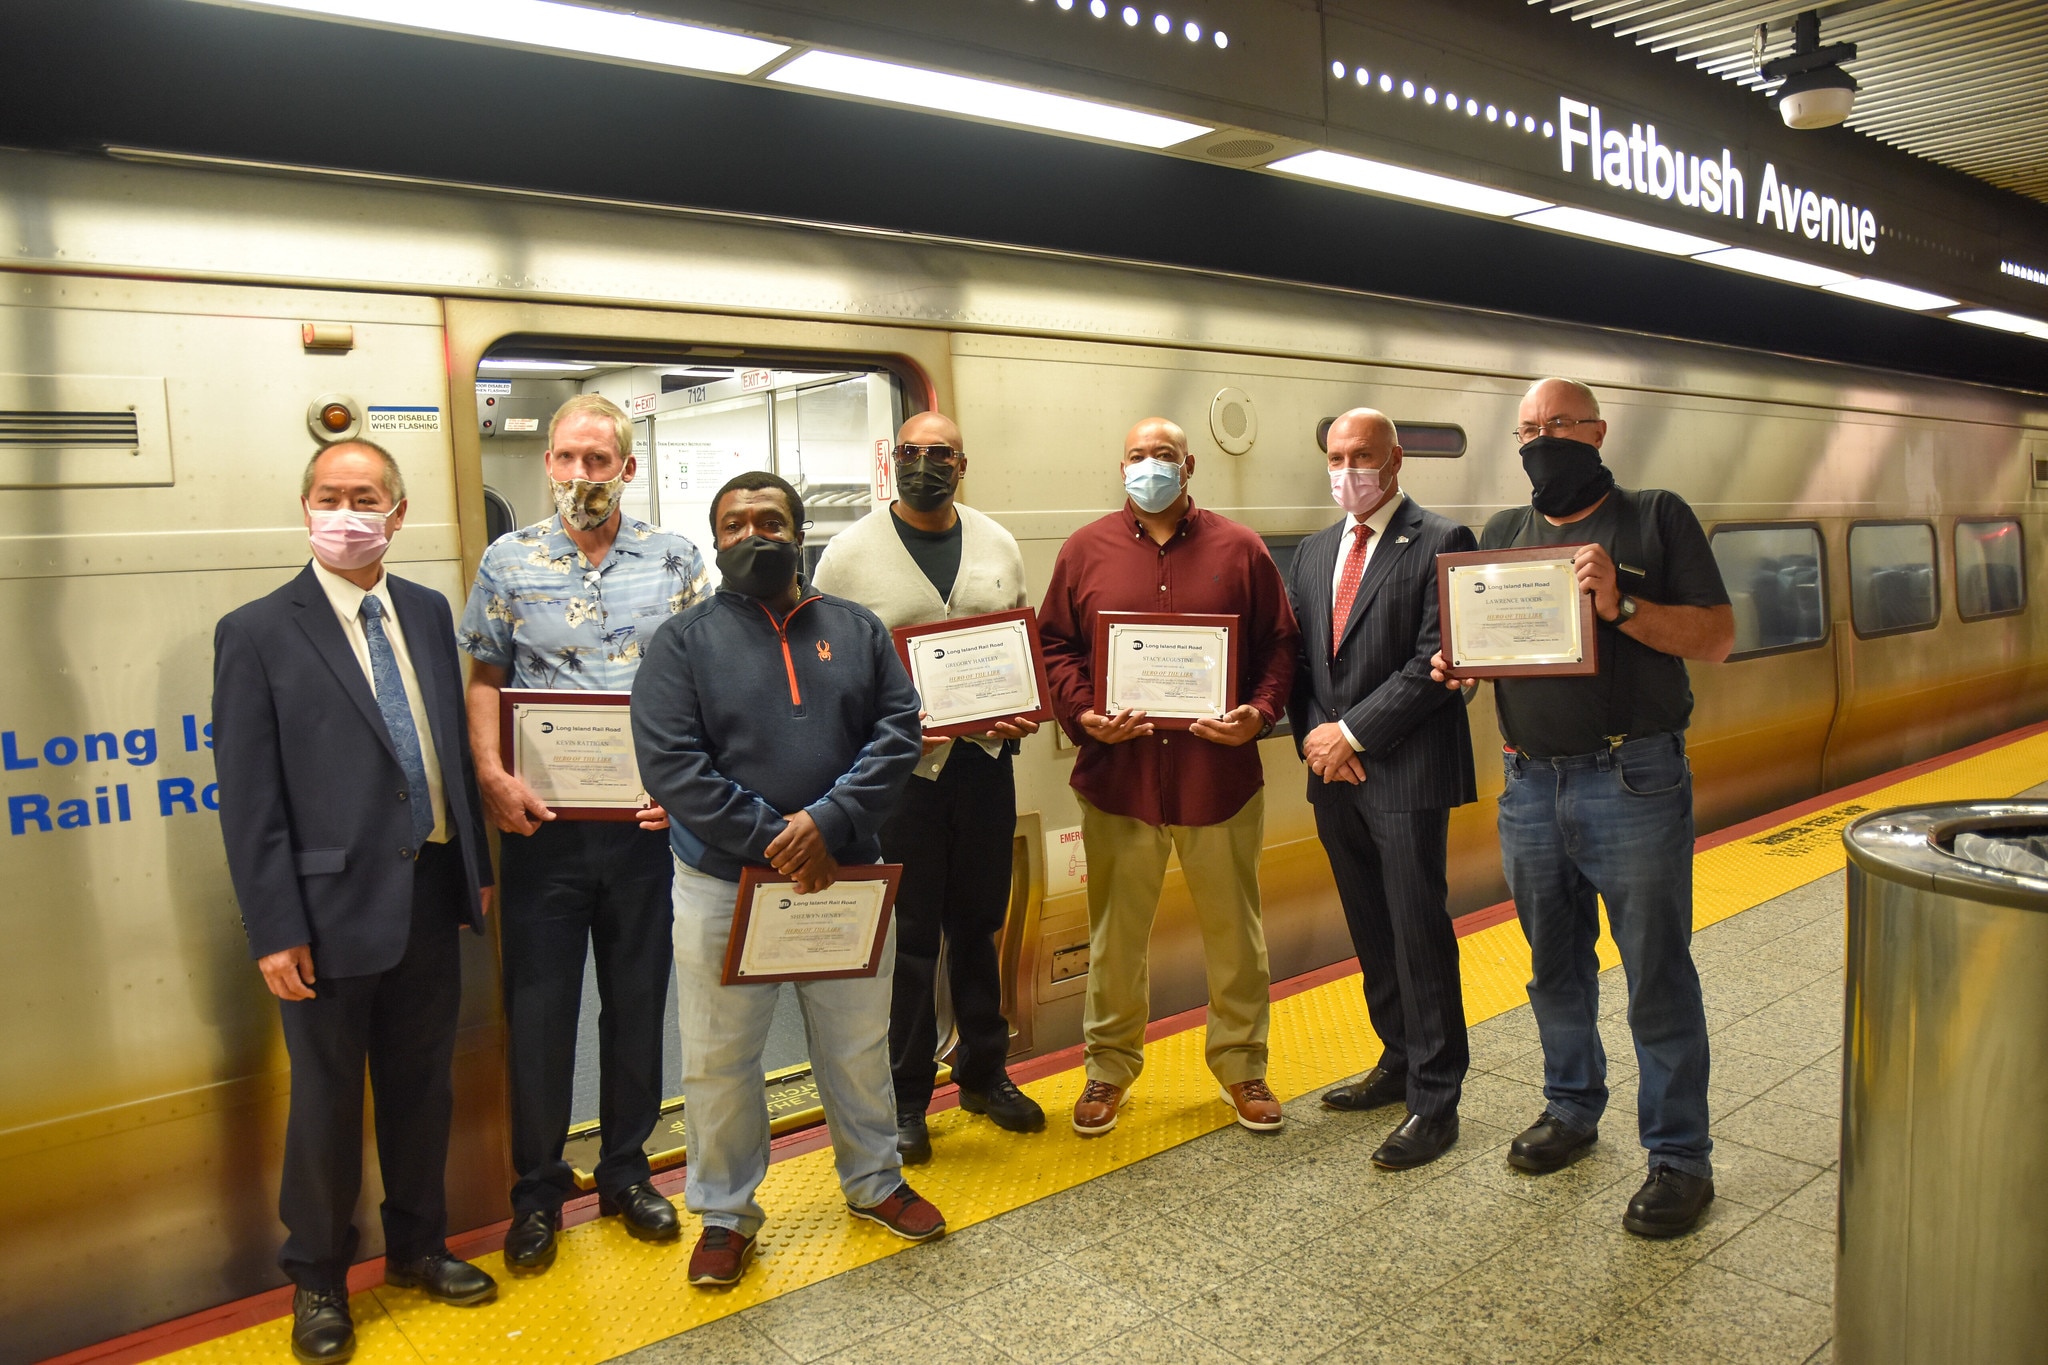 Heroic LIRR Employees Save Customer’s Life at East New York Station in